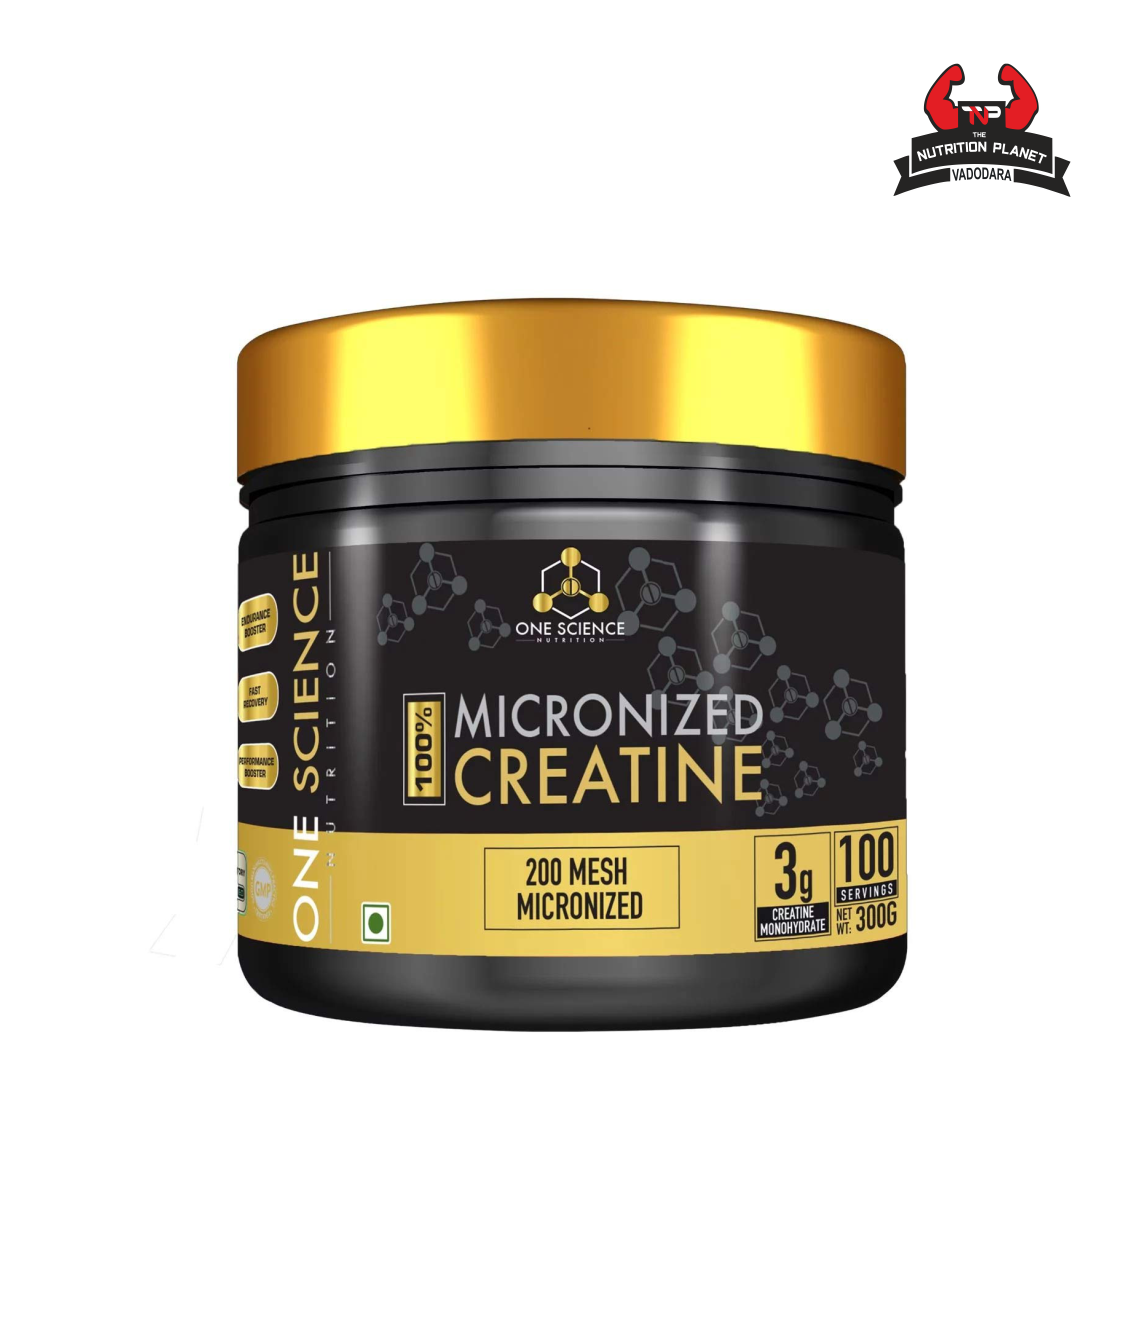  One Science Nutrition Creatine (300g) with official Authentic tag